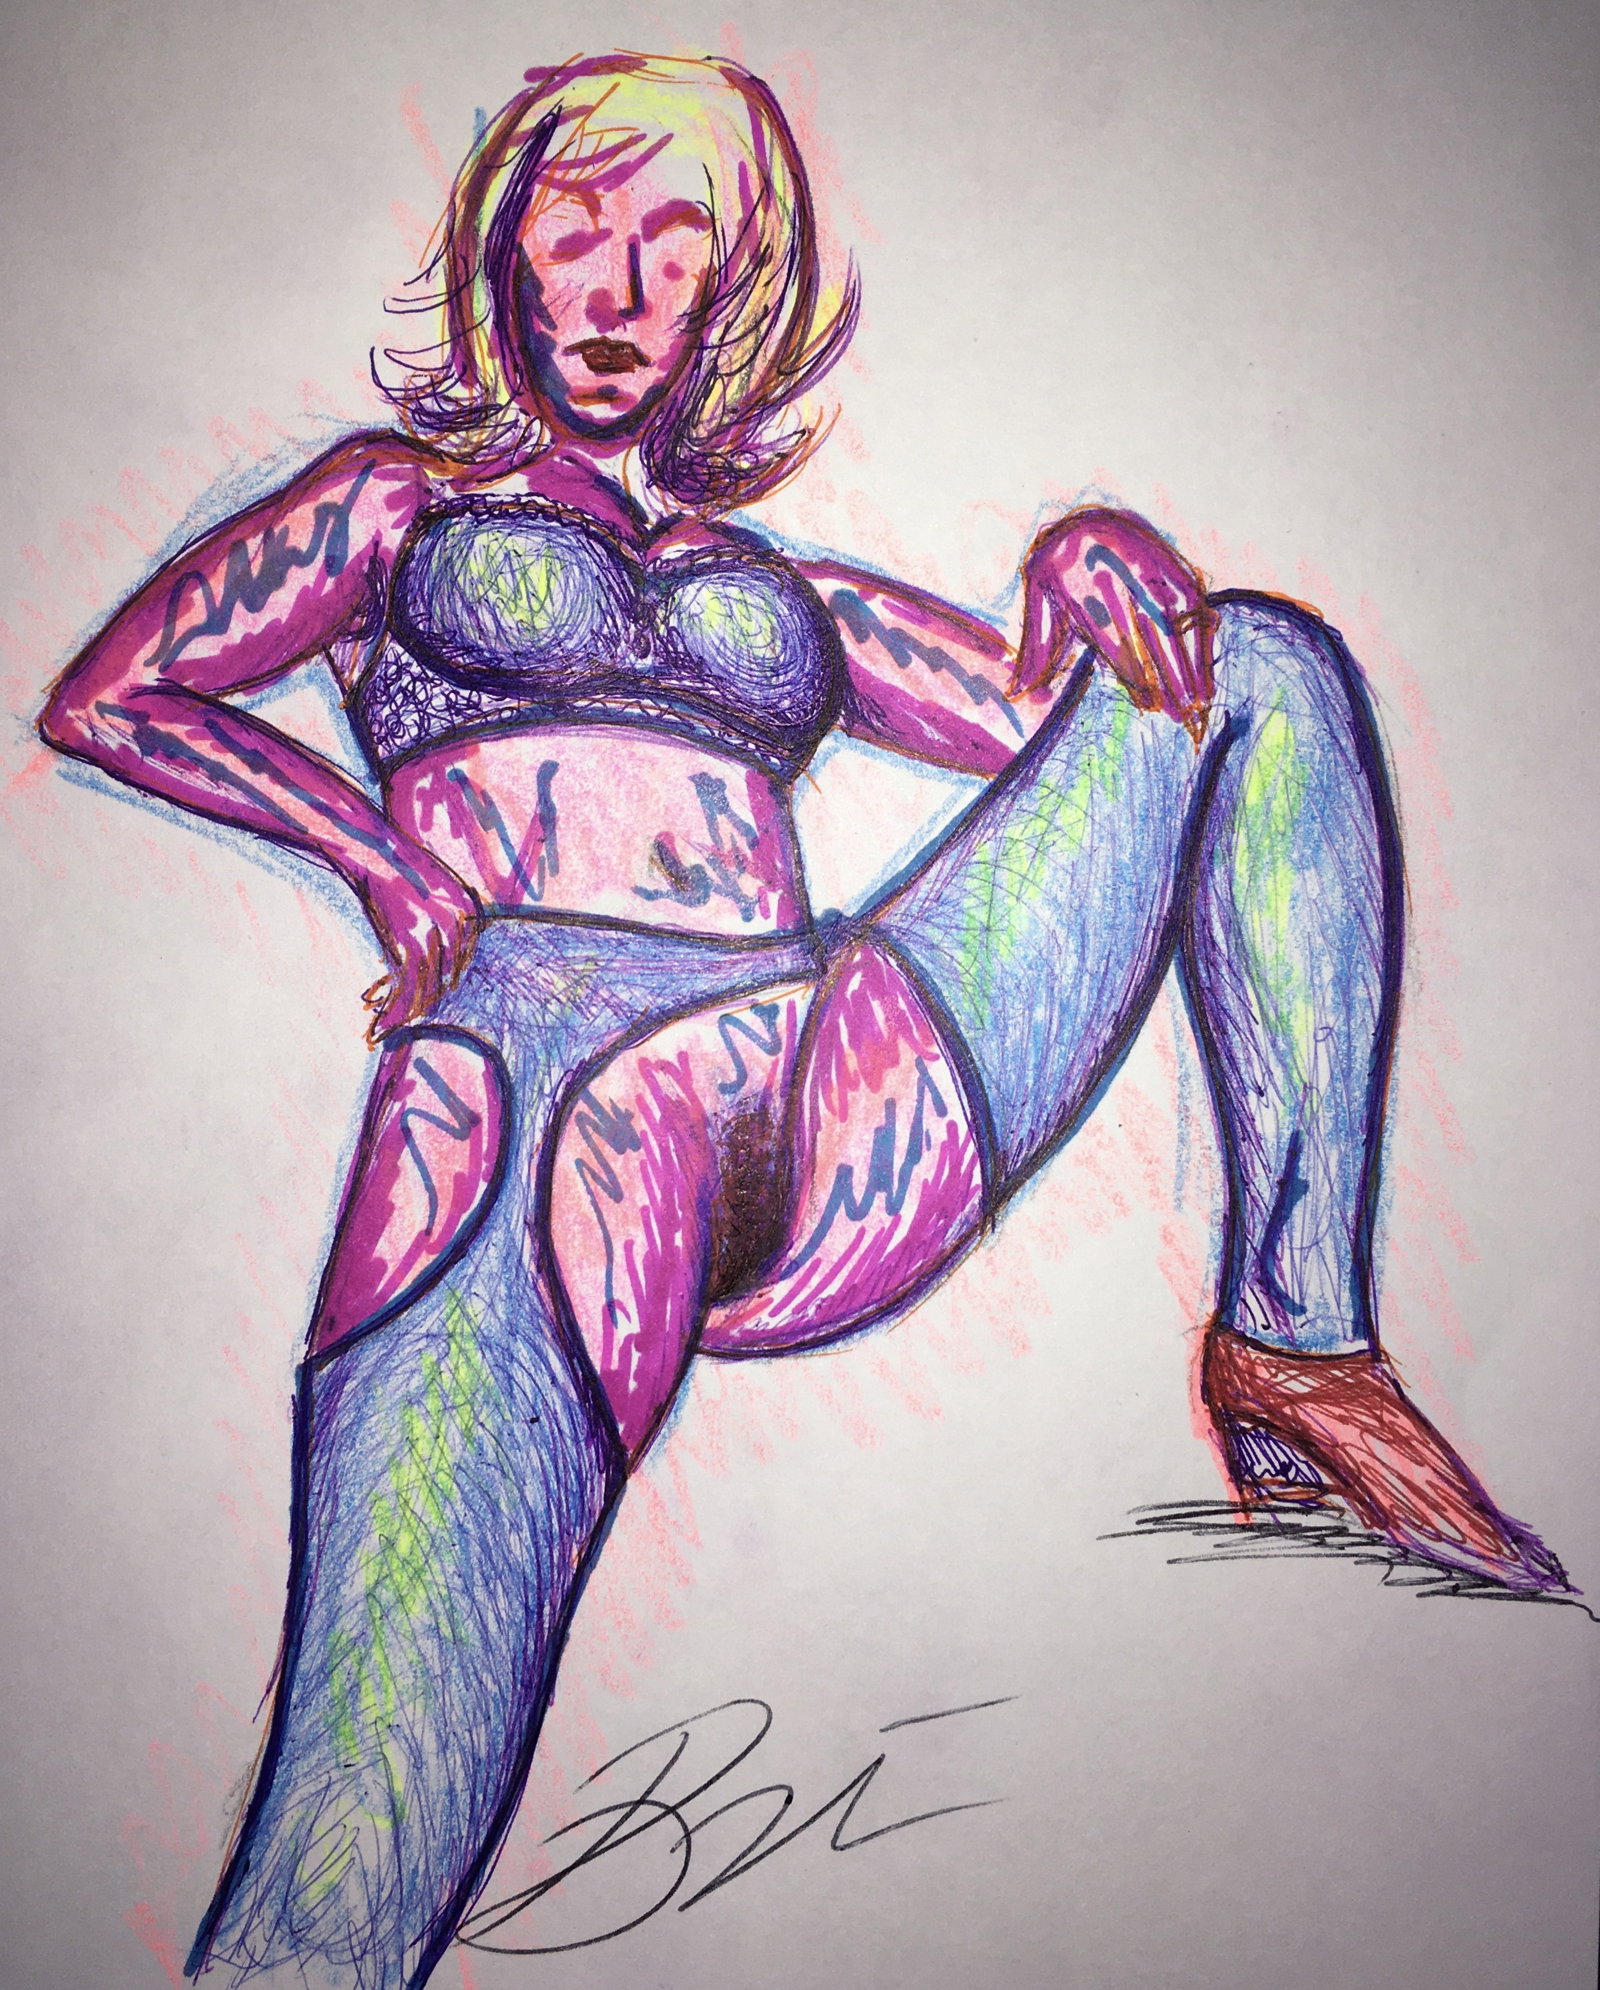 Photo by Brí with the username @TheEroticArtistBri, who is a verified user,  June 10, 2020 at 8:51 PM and the text says 'my first drawing in quite some time.  also my first work l've signed with my artist/genderfluid name, Brí.  I'm so thrilled to be starting to build connections with others to allow me to create art with. @anderz069 is quite a stunning muse!  show her page..'